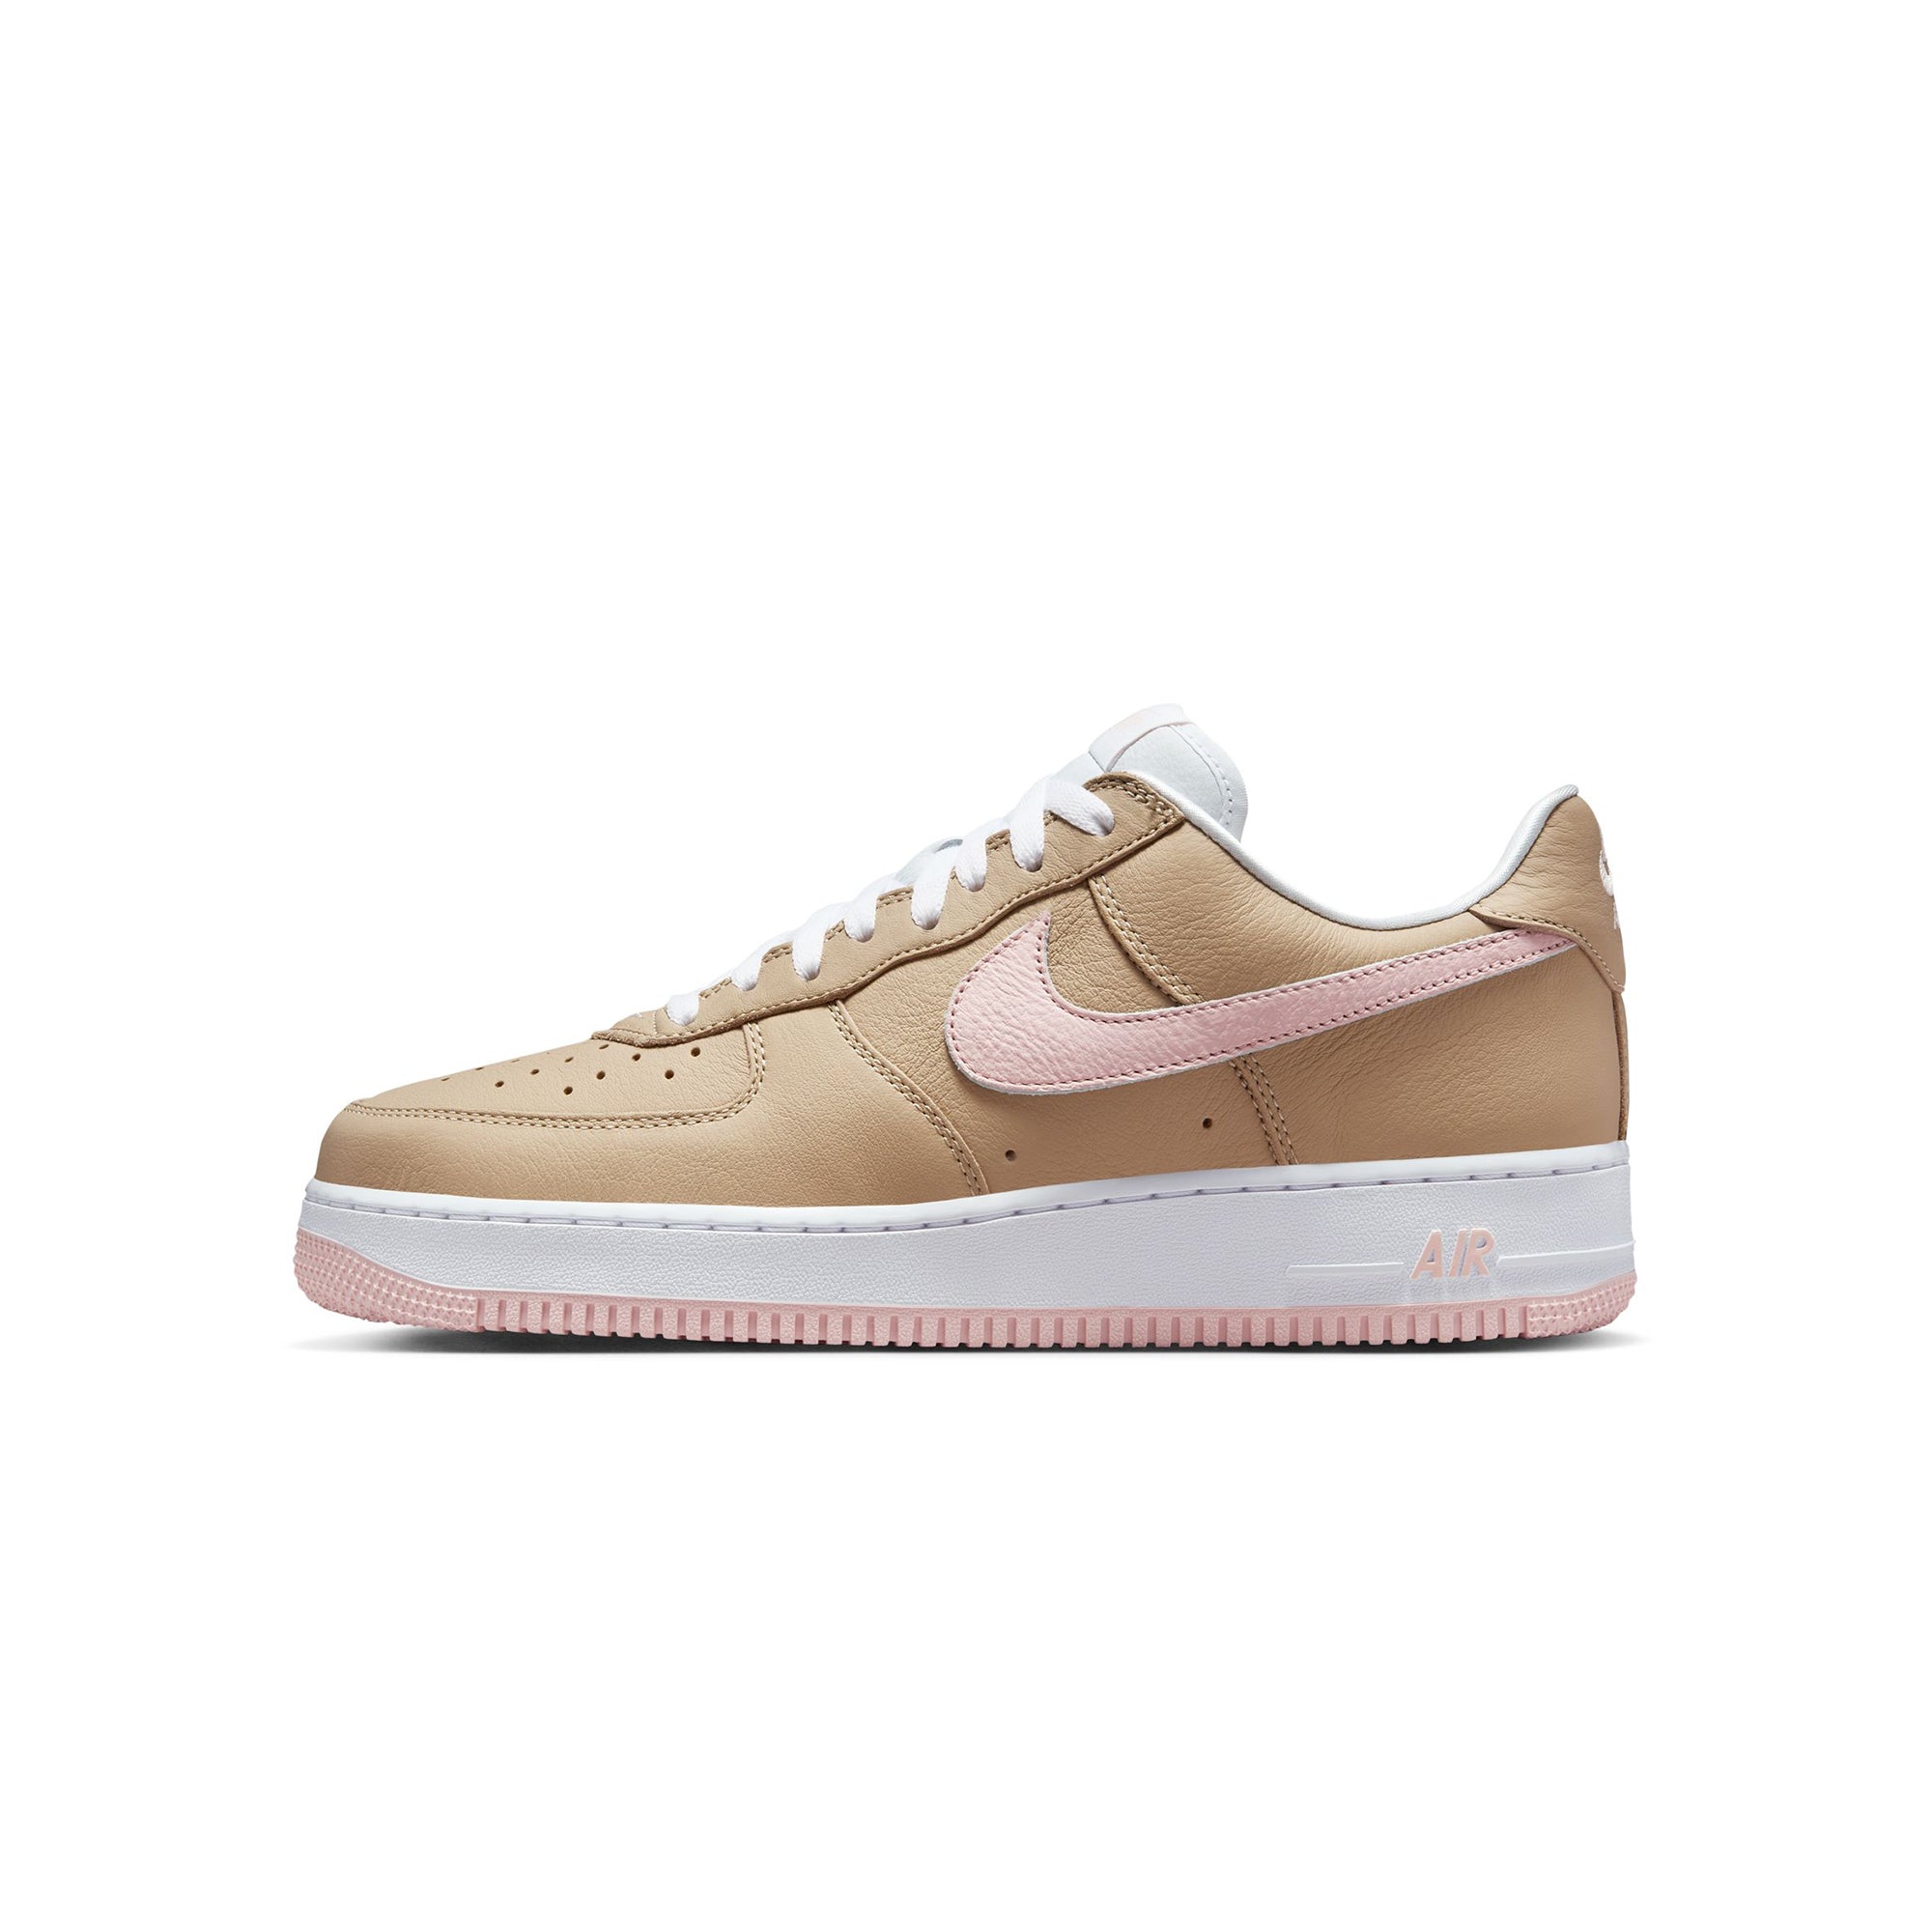 Nike Mens Air Force 1 Low Retro "Linen" Shoes card image